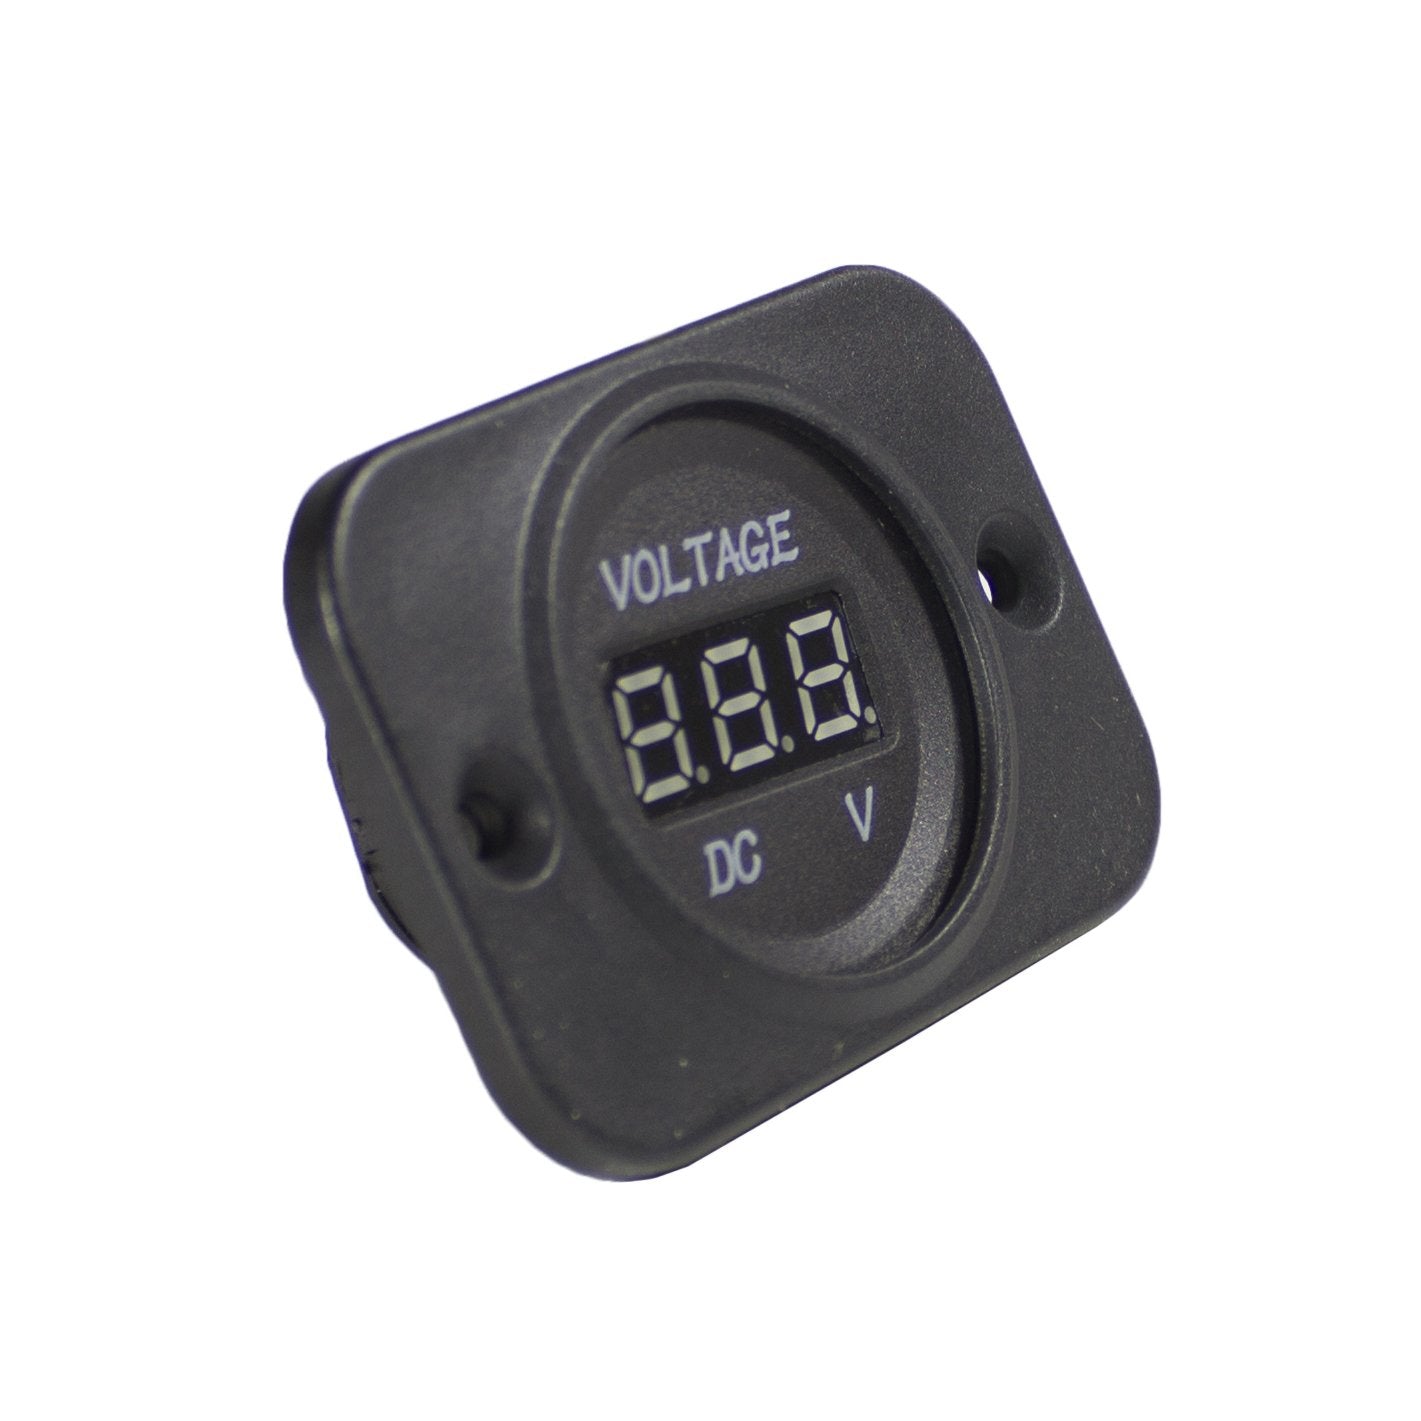 WirthCo 20600 Battery Doctor DC Digital Voltage Meter